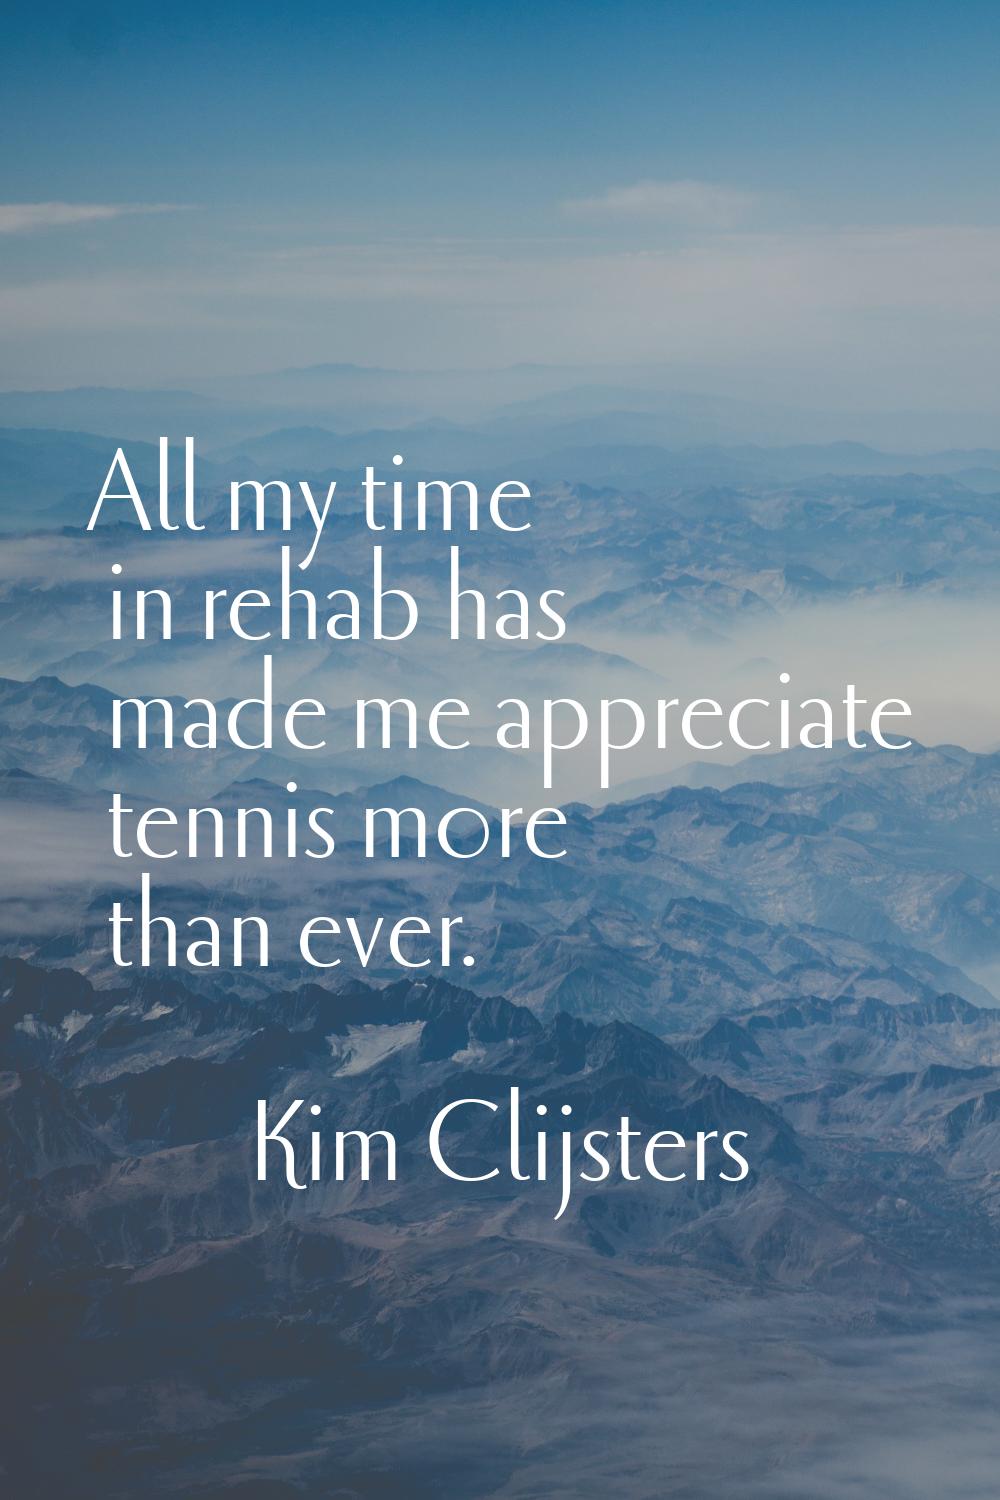 All my time in rehab has made me appreciate tennis more than ever.